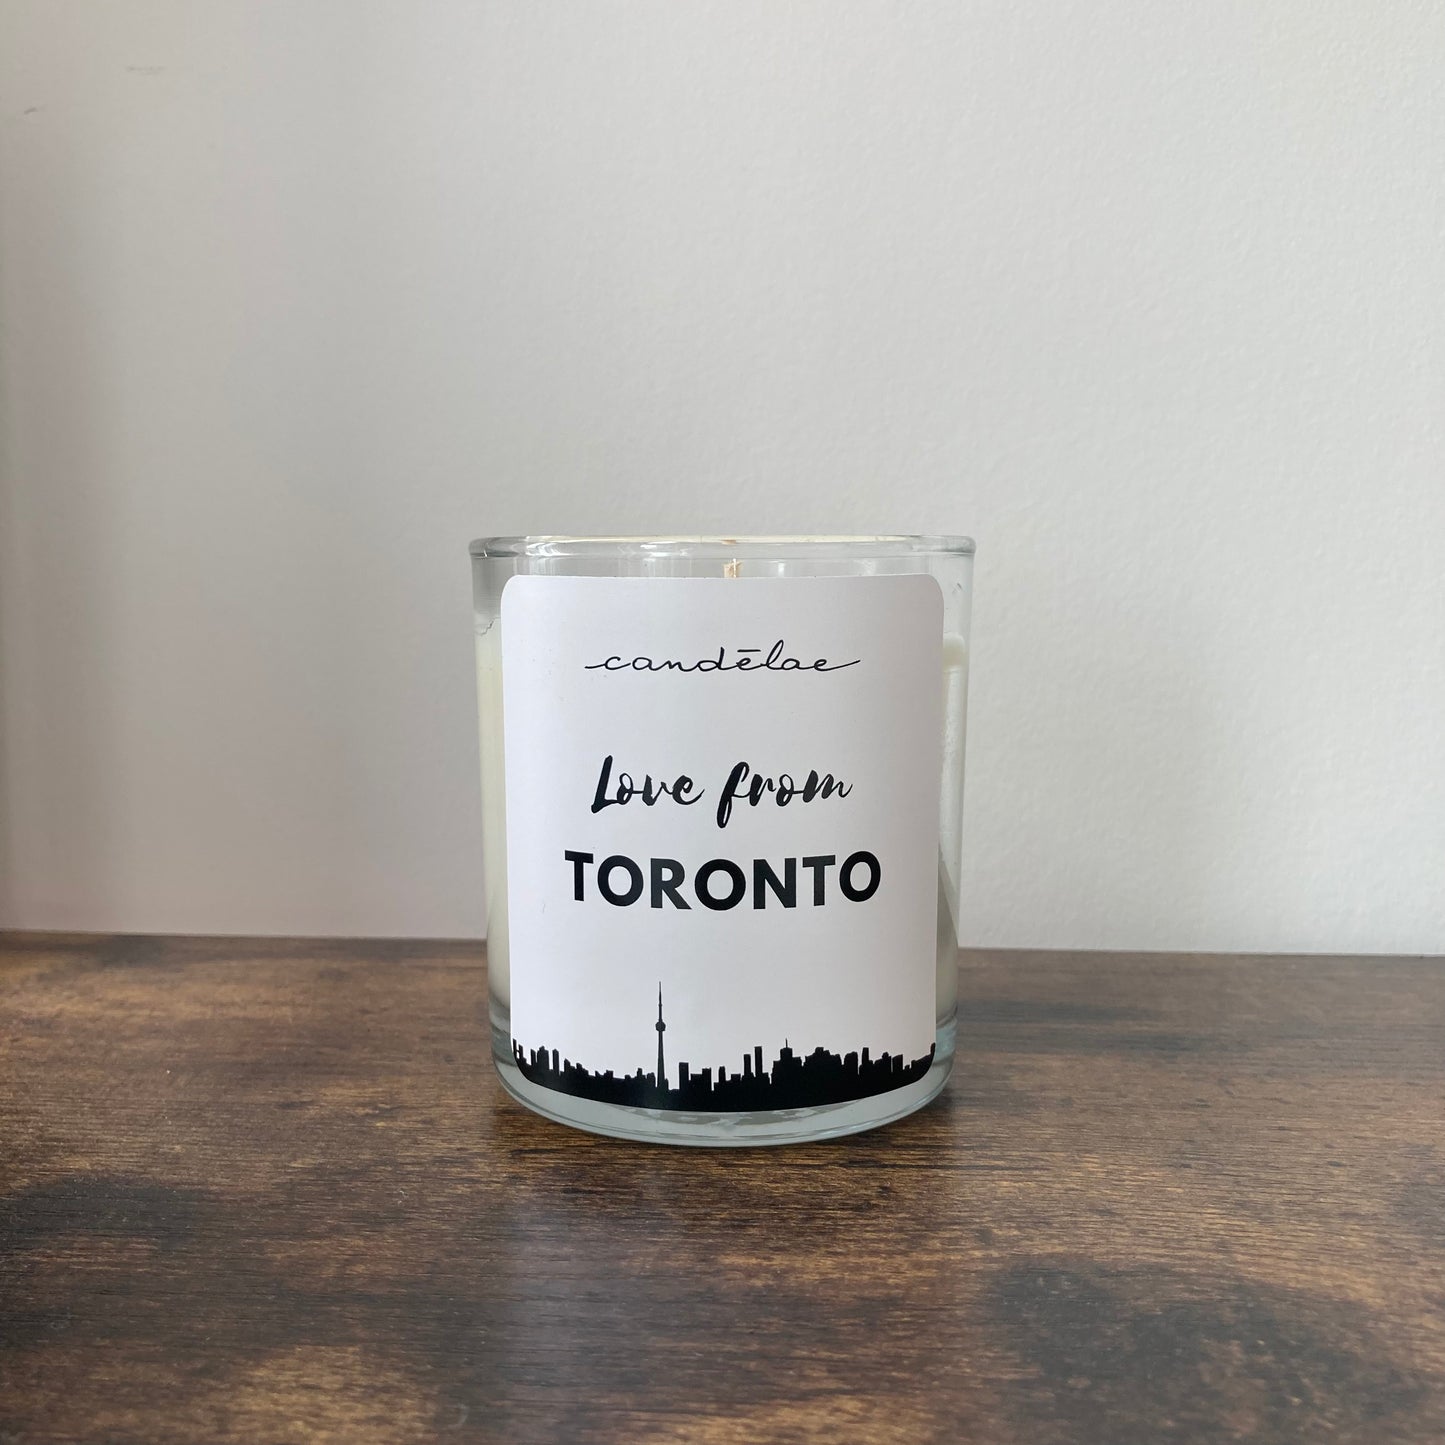 Love from Toronto | Scented candle